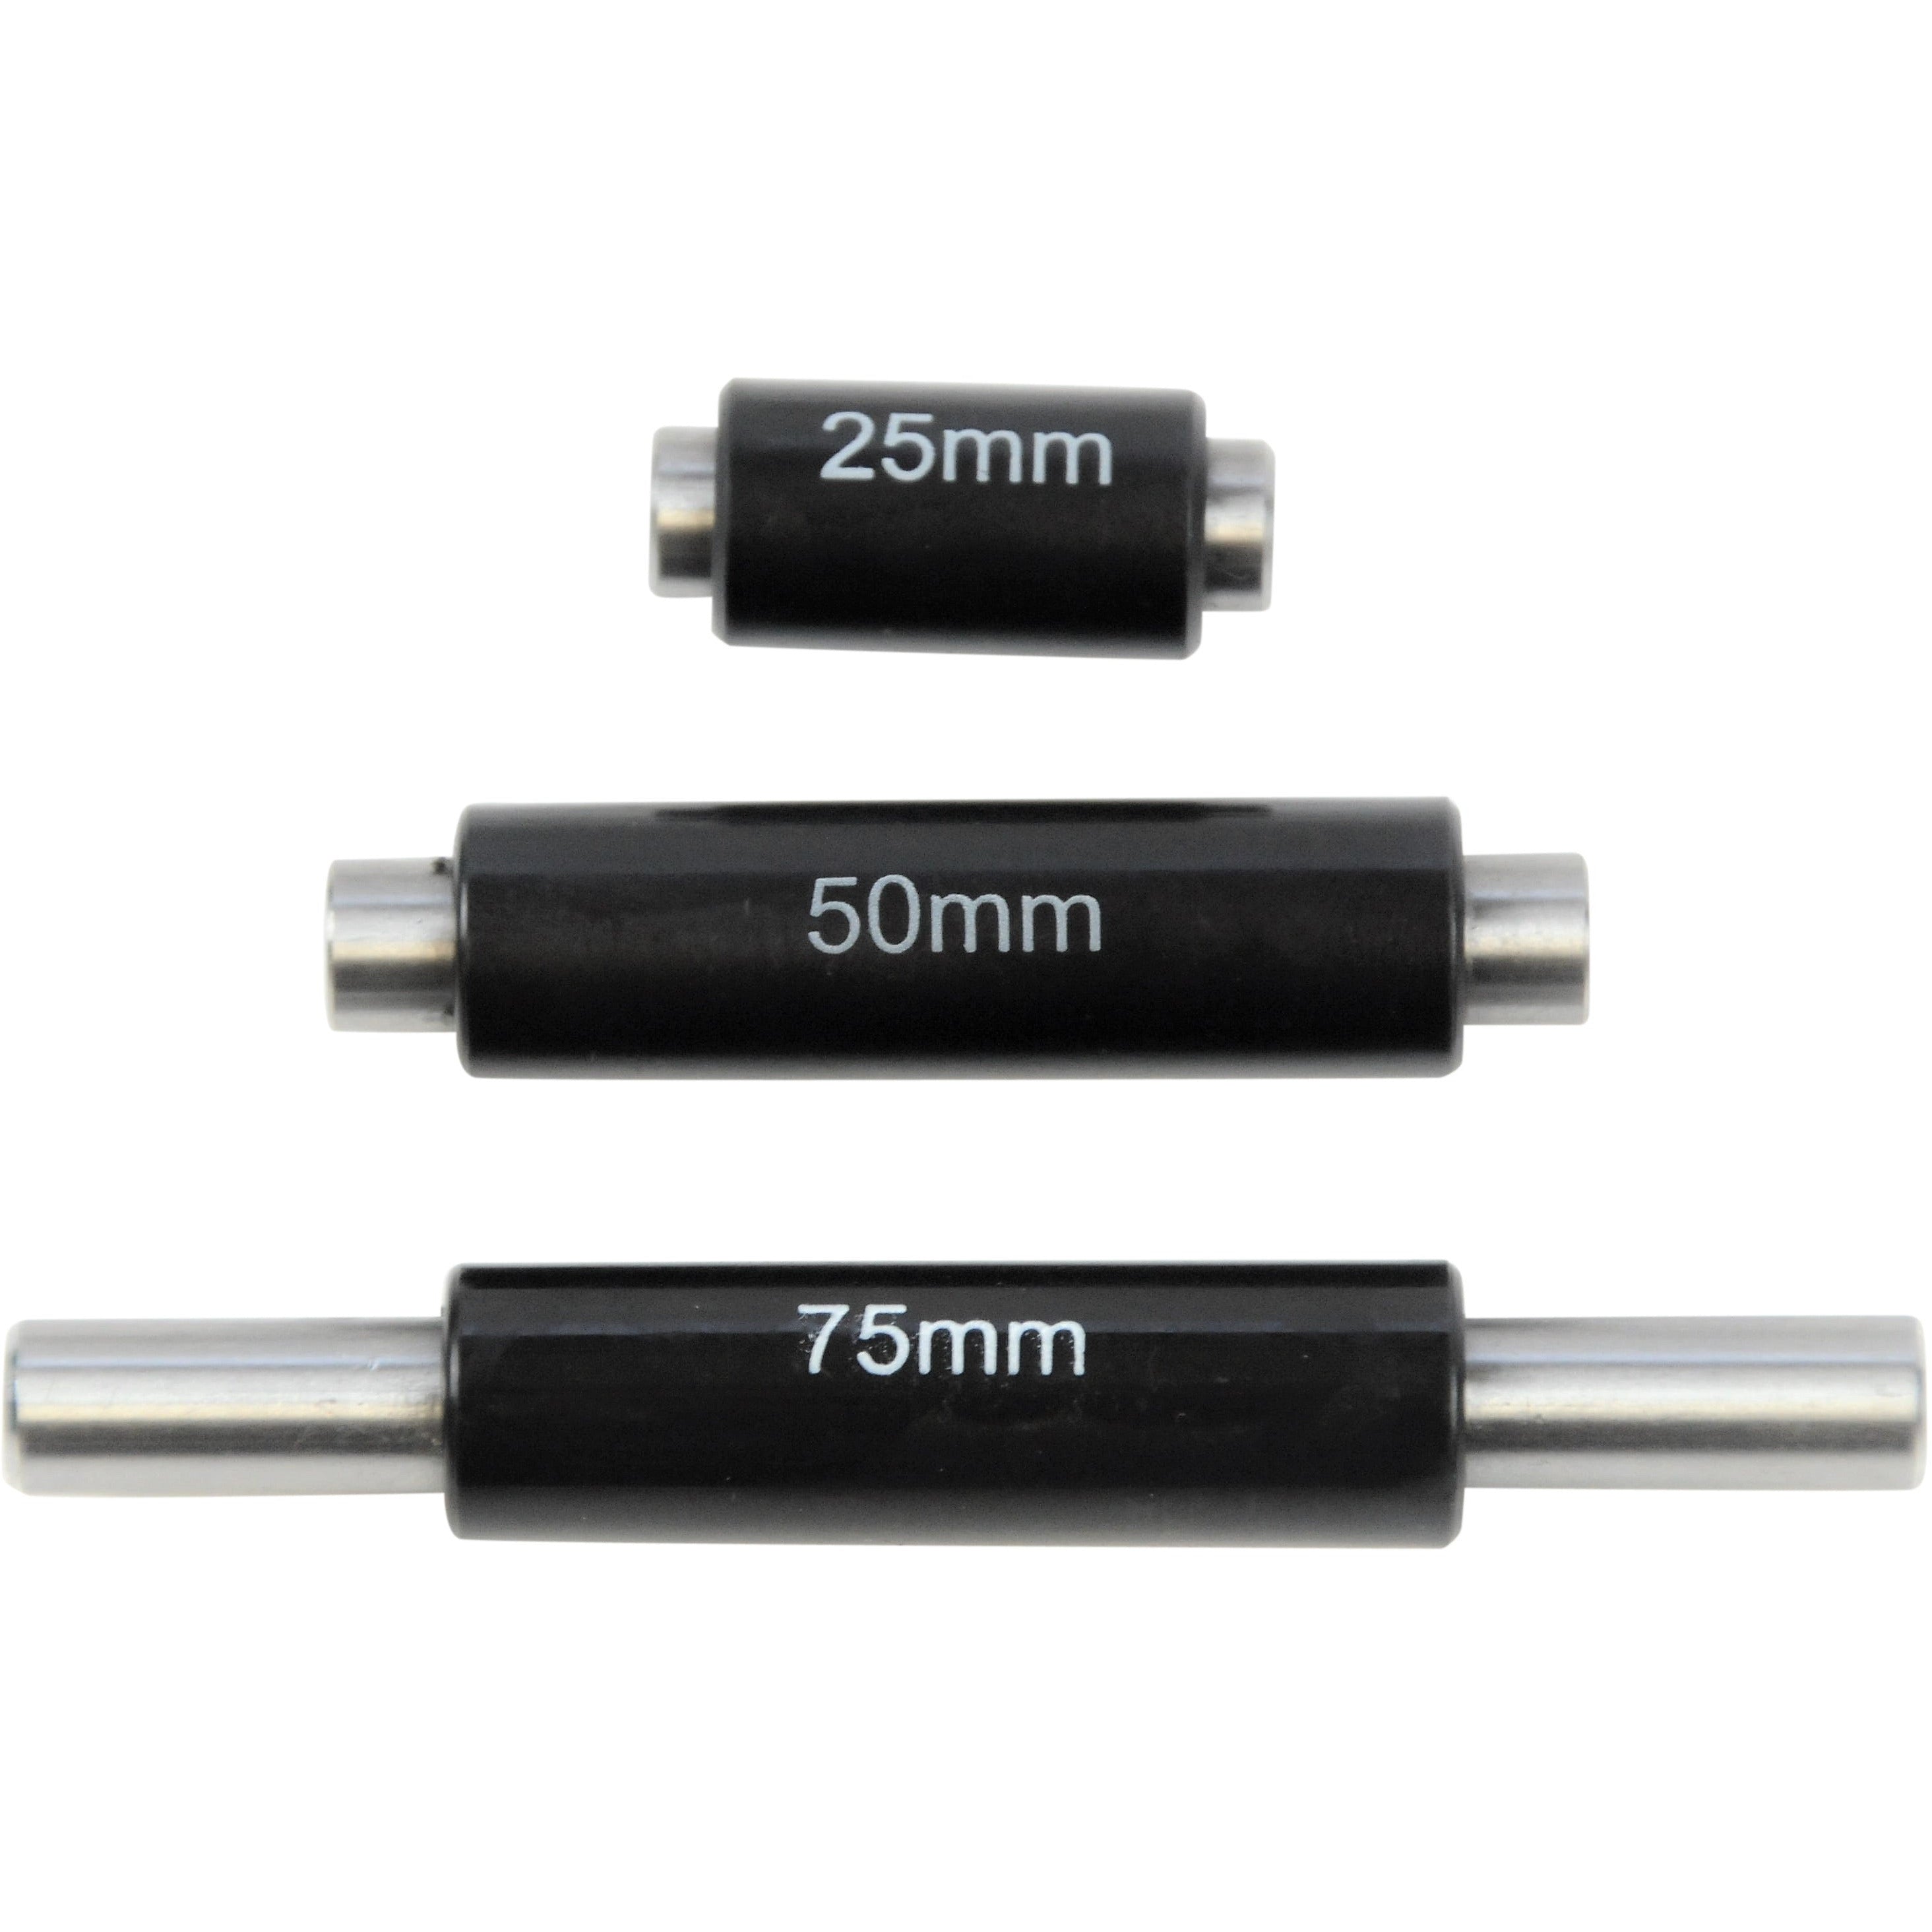 Insize Outside Micrometer Set 4 Piece Series  0-100mm Range Series 3203-1004A